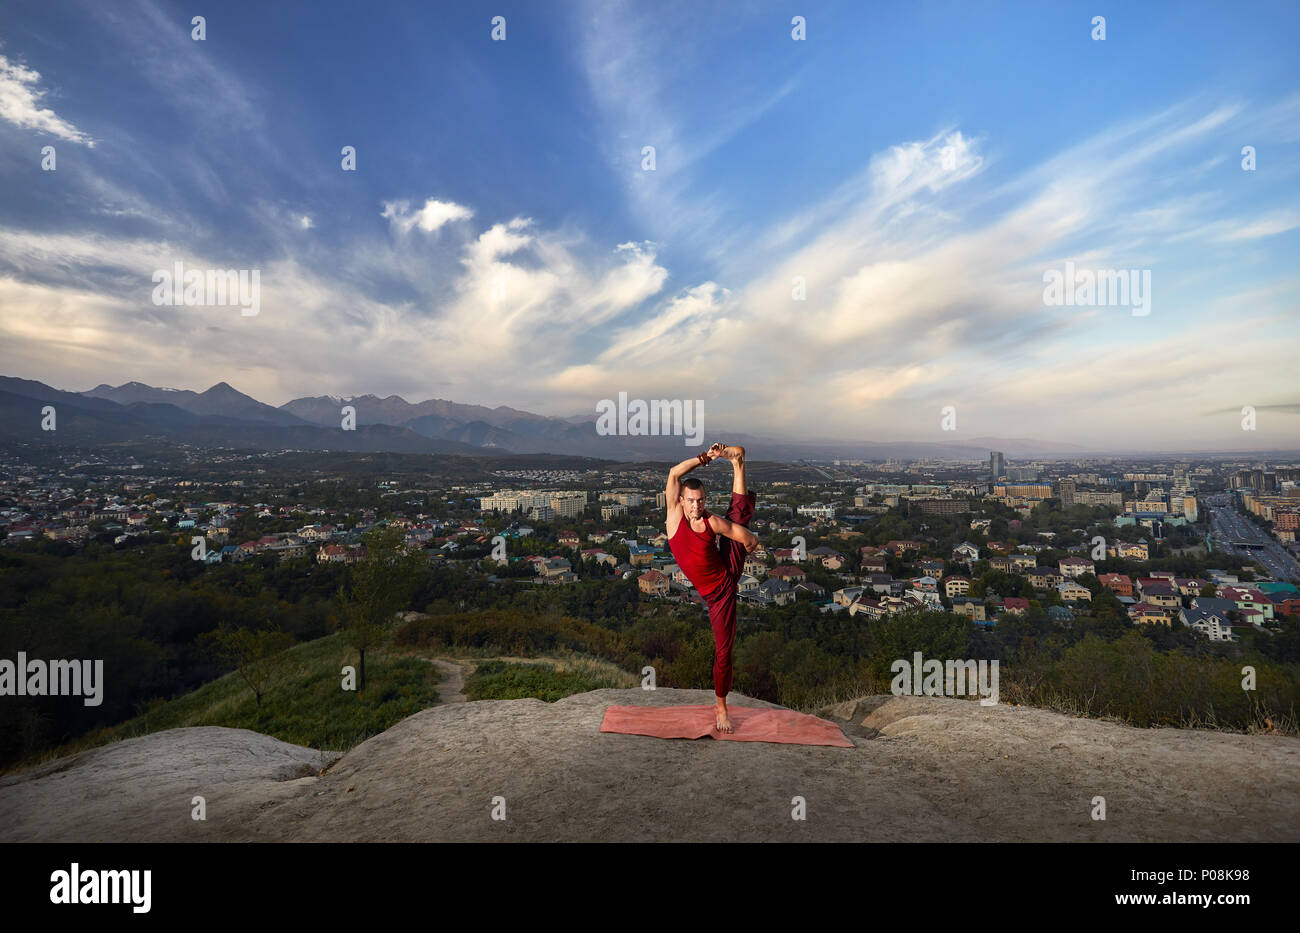 Fit man in red costume doing yoga balance asana in the park with city and mountain on background in Almaty, Kazakhstan Stock Photo